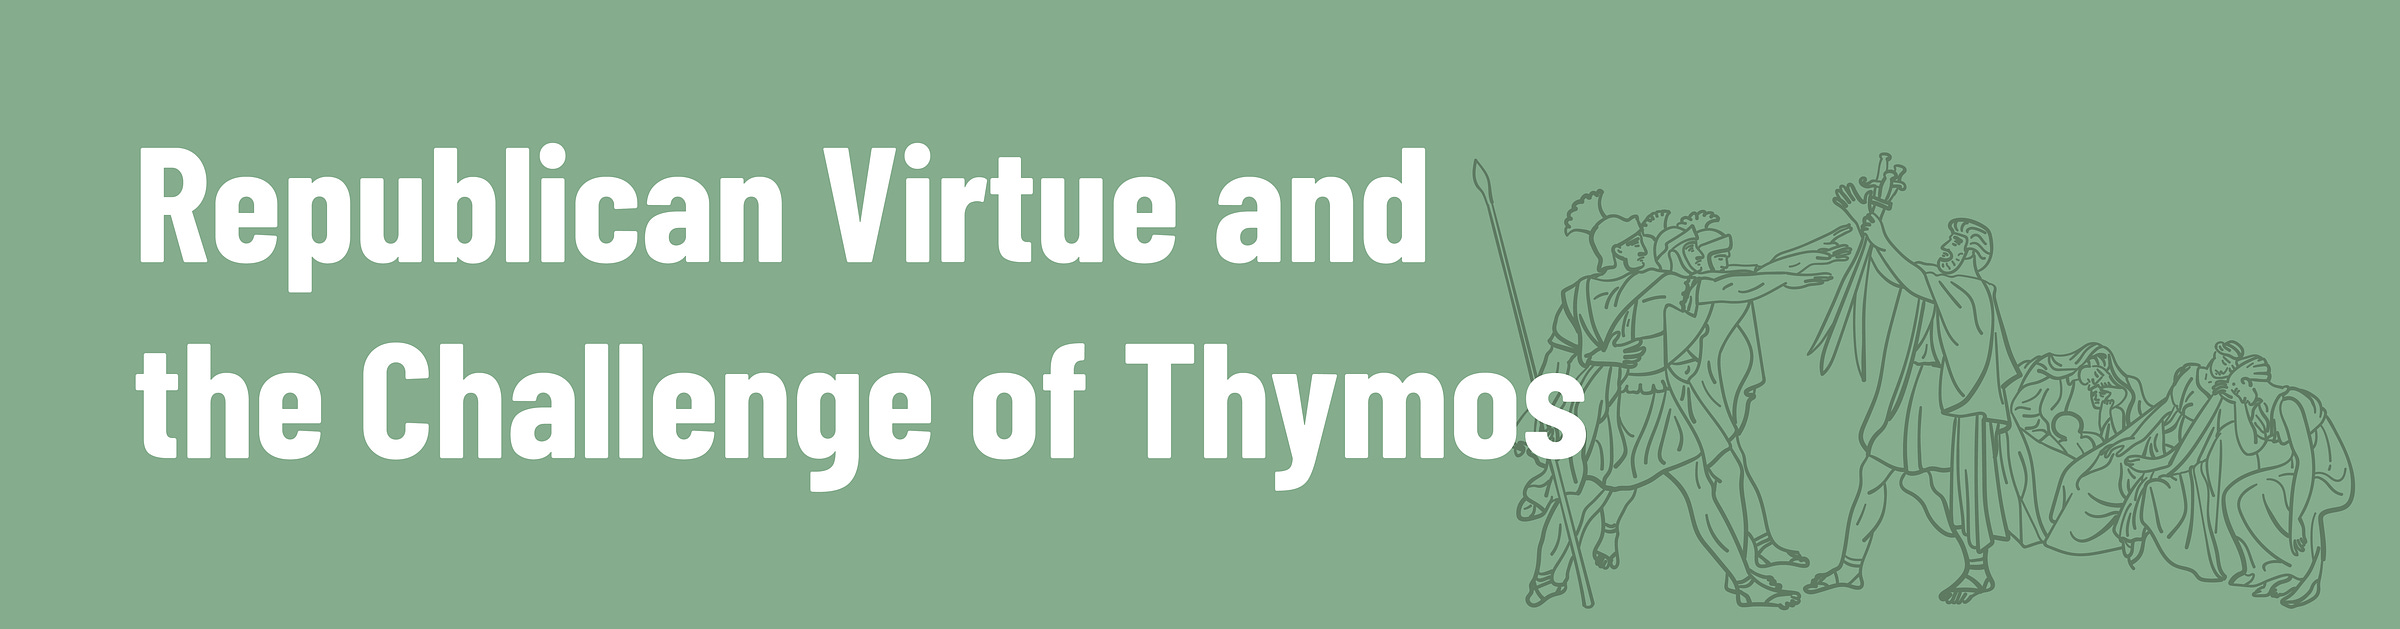 Republican Virtue and the Challenge of Thymos